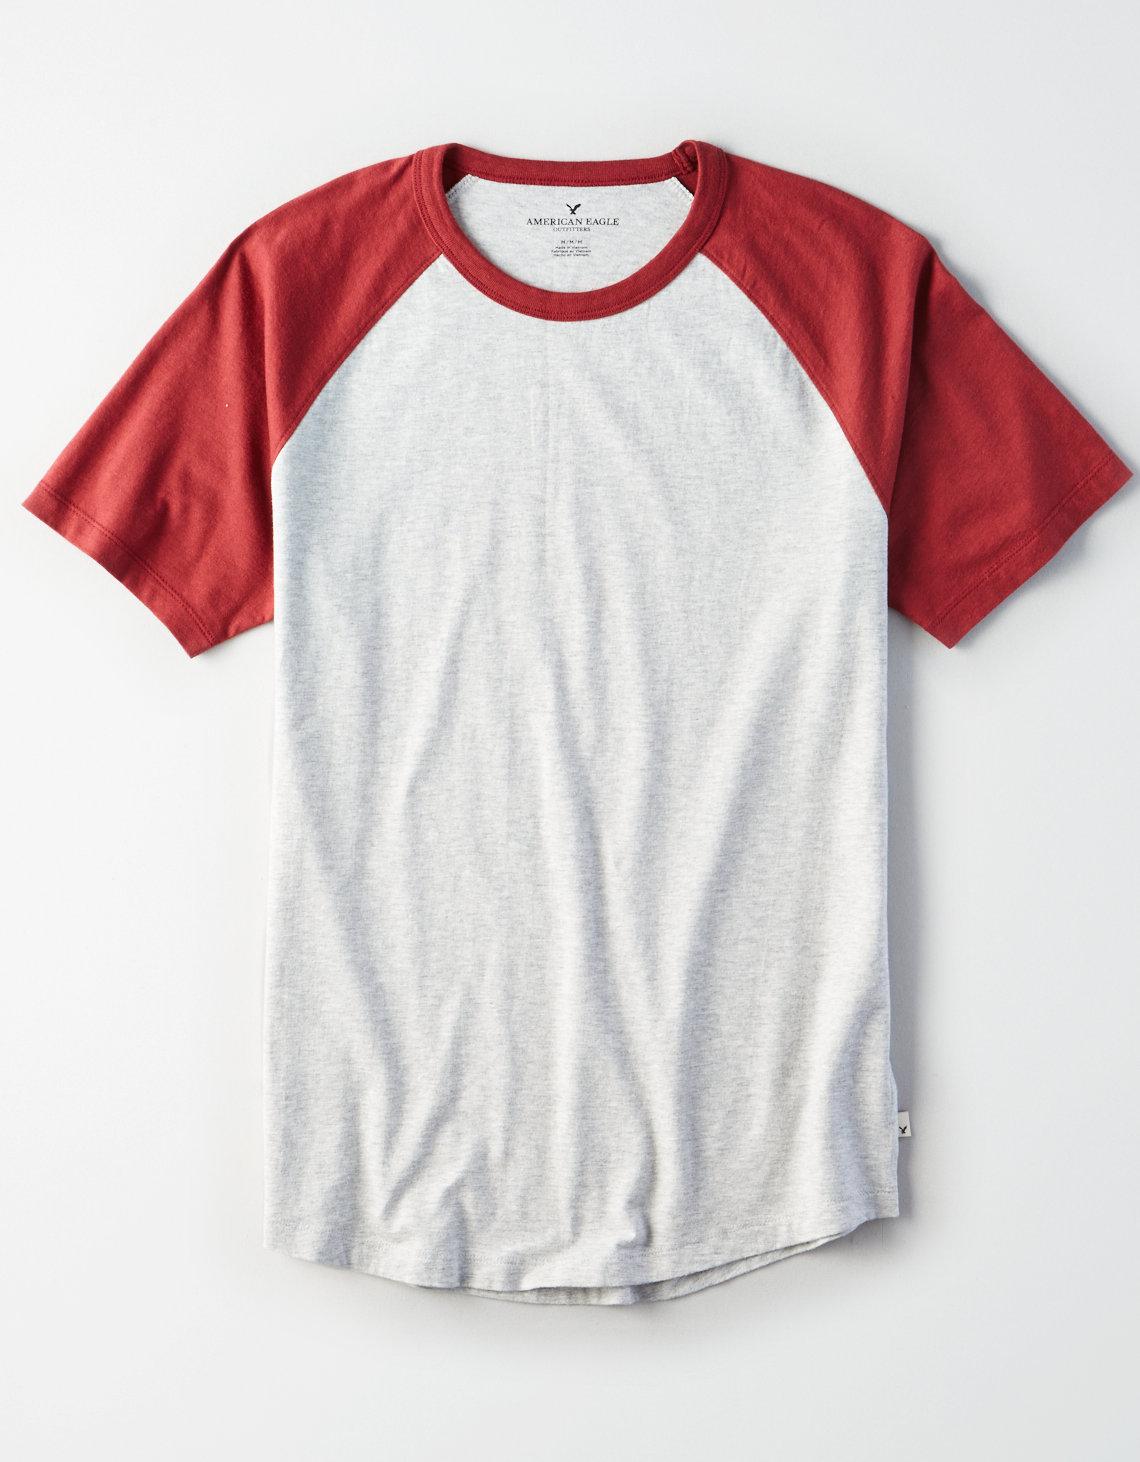 american eagle red t shirt